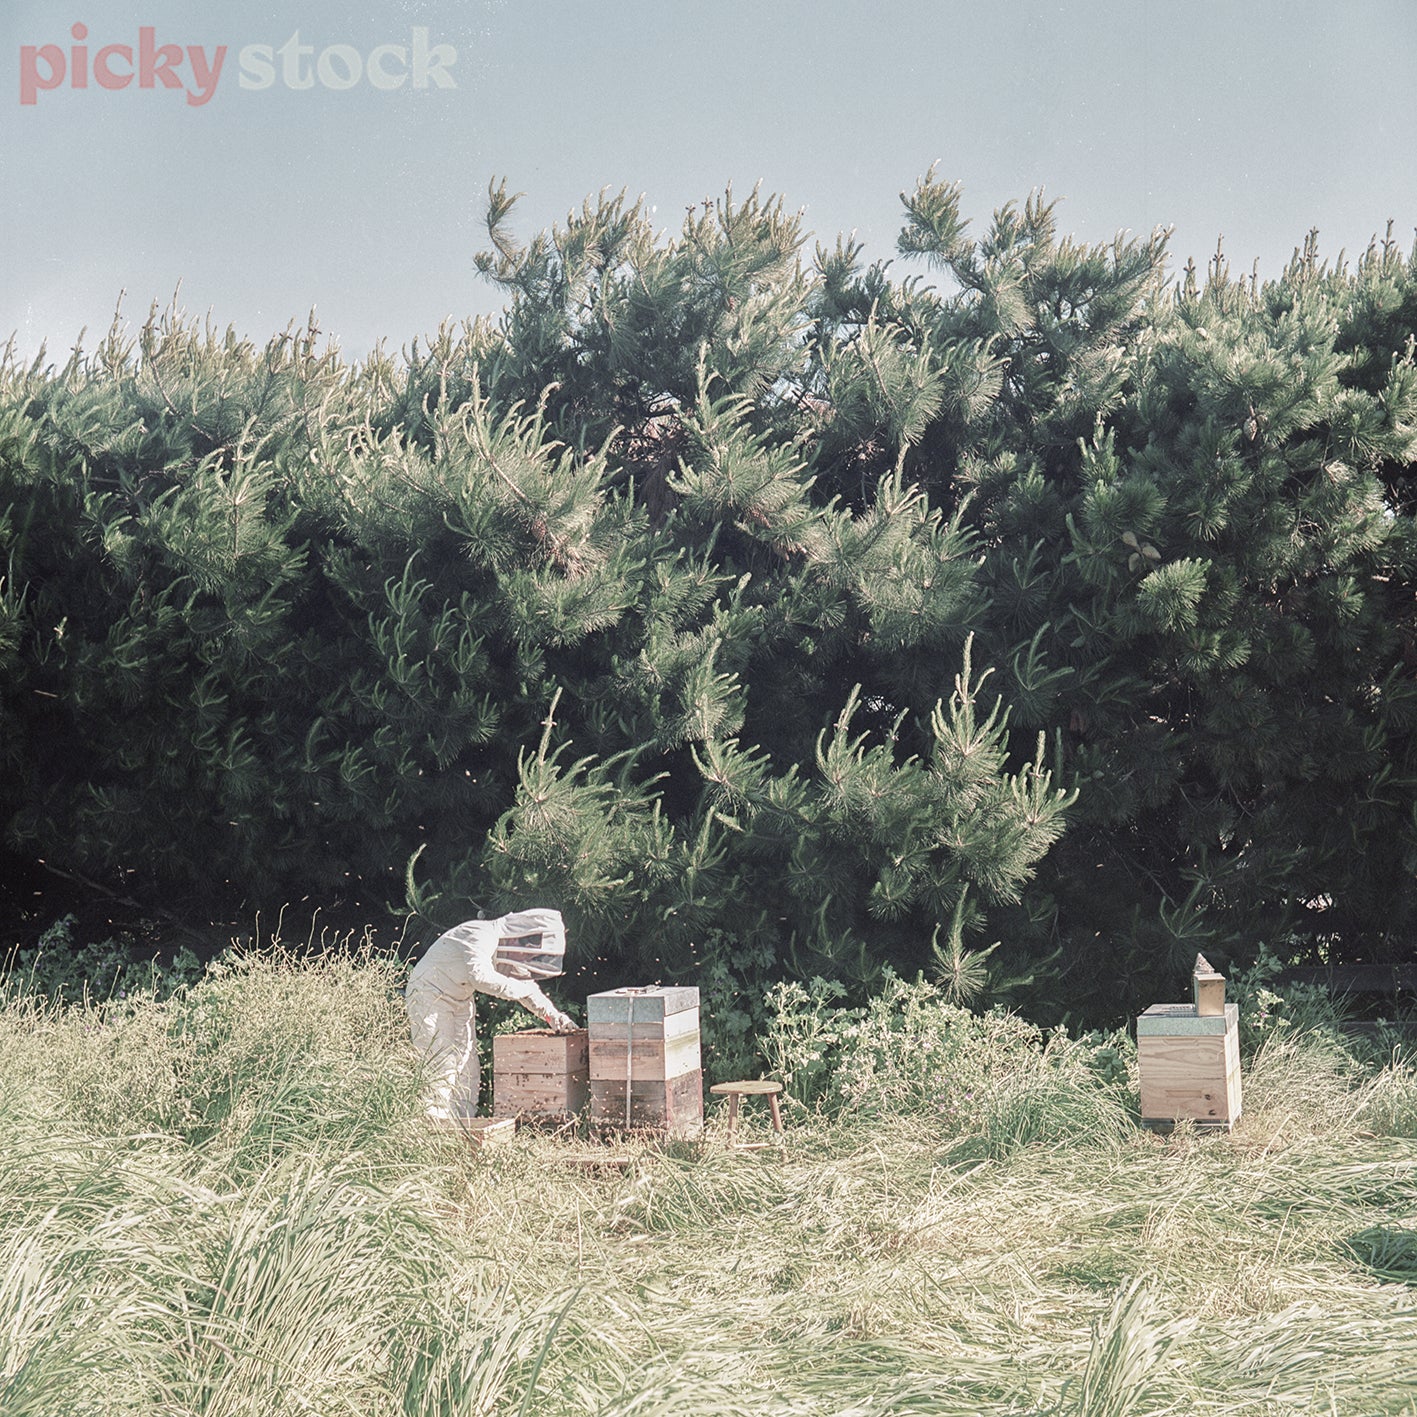 Single beekeeper inspecting live beehive in the long grass. Deep green pine trees in background. Bees flying around the frame. Soft blue sky. 